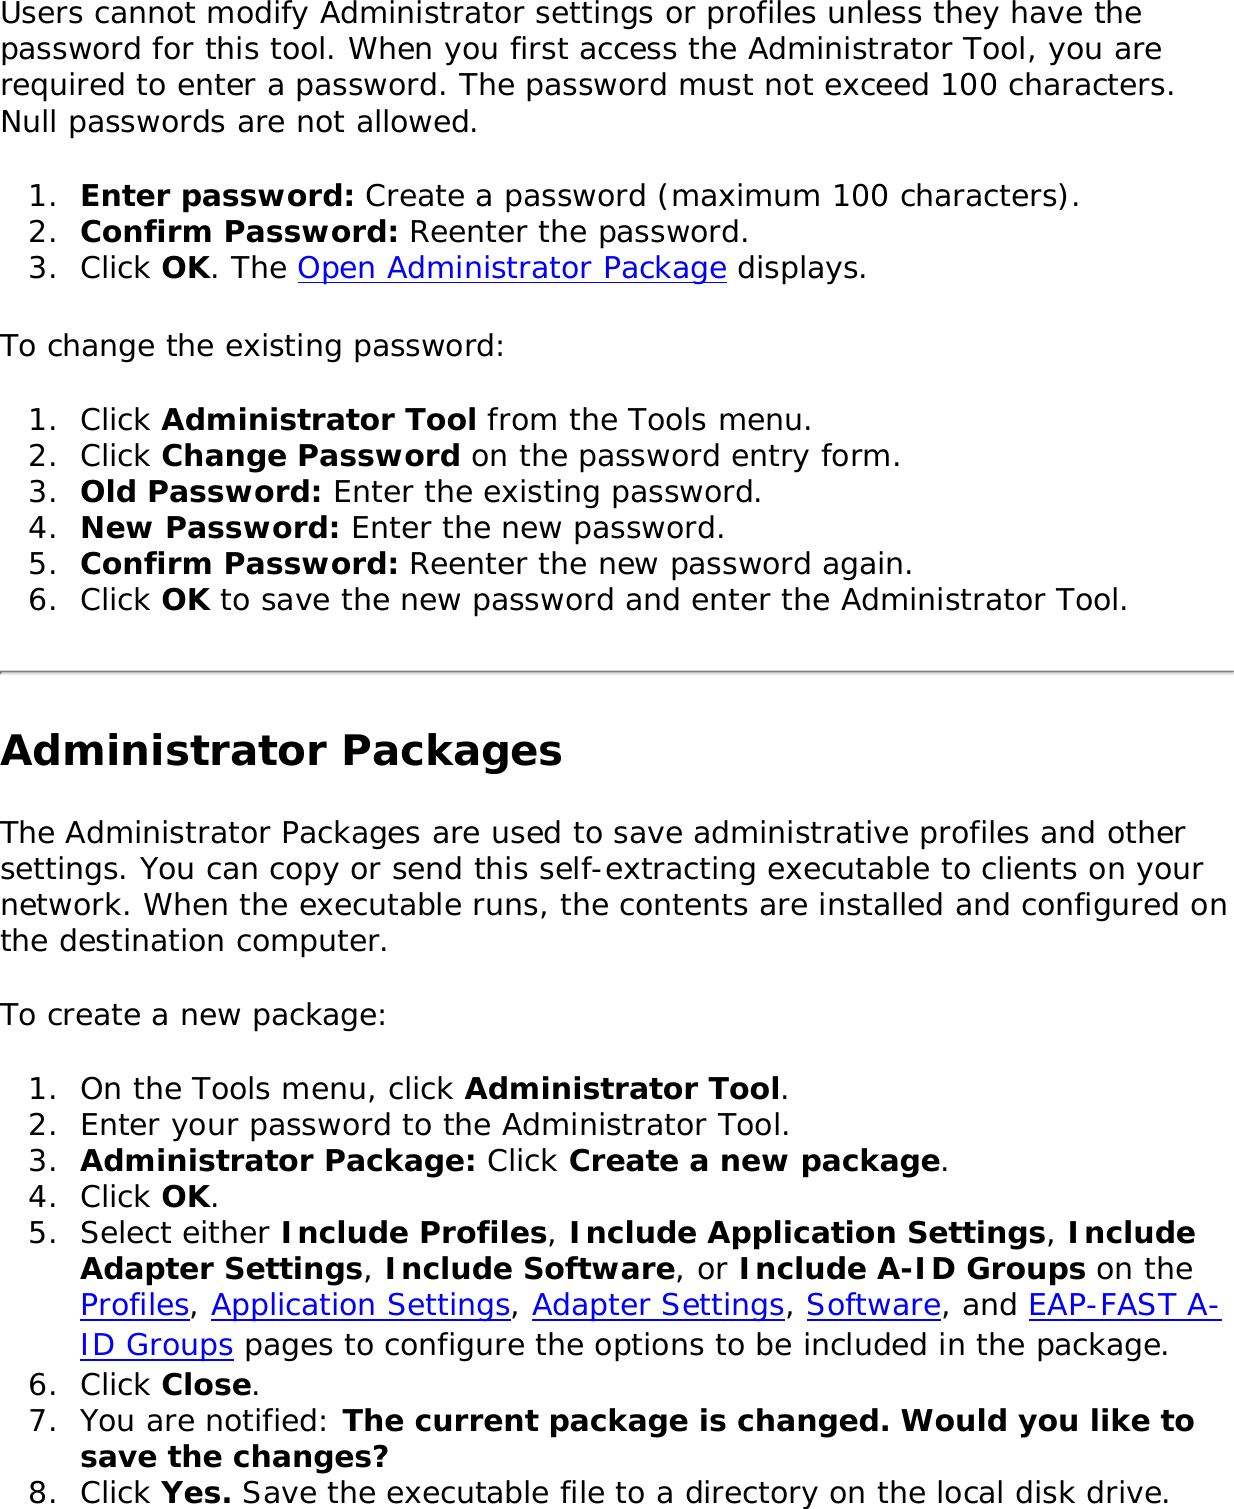 Users cannot modify Administrator settings or profiles unless they have the password for this tool. When you first access the Administrator Tool, you are required to enter a password. The password must not exceed 100 characters. Null passwords are not allowed. 1.  Enter password: Create a password (maximum 100 characters). 2.  Confirm Password: Reenter the password.3.  Click OK. The Open Administrator Package displays. To change the existing password: 1.  Click Administrator Tool from the Tools menu. 2.  Click Change Password on the password entry form.3.  Old Password: Enter the existing password.4.  New Password: Enter the new password.5.  Confirm Password: Reenter the new password again. 6.  Click OK to save the new password and enter the Administrator Tool. Administrator PackagesThe Administrator Packages are used to save administrative profiles and other settings. You can copy or send this self-extracting executable to clients on your network. When the executable runs, the contents are installed and configured on the destination computer. To create a new package: 1.  On the Tools menu, click Administrator Tool. 2.  Enter your password to the Administrator Tool.3.  Administrator Package: Click Create a new package.4.  Click OK. 5.  Select either Include Profiles, Include Application Settings, Include Adapter Settings, Include Software, or Include A-ID Groups on the Profiles, Application Settings, Adapter Settings, Software, and EAP-FAST A-ID Groups pages to configure the options to be included in the package. 6.  Click Close. 7.  You are notified: The current package is changed. Would you like to save the changes?8.  Click Yes. Save the executable file to a directory on the local disk drive. 